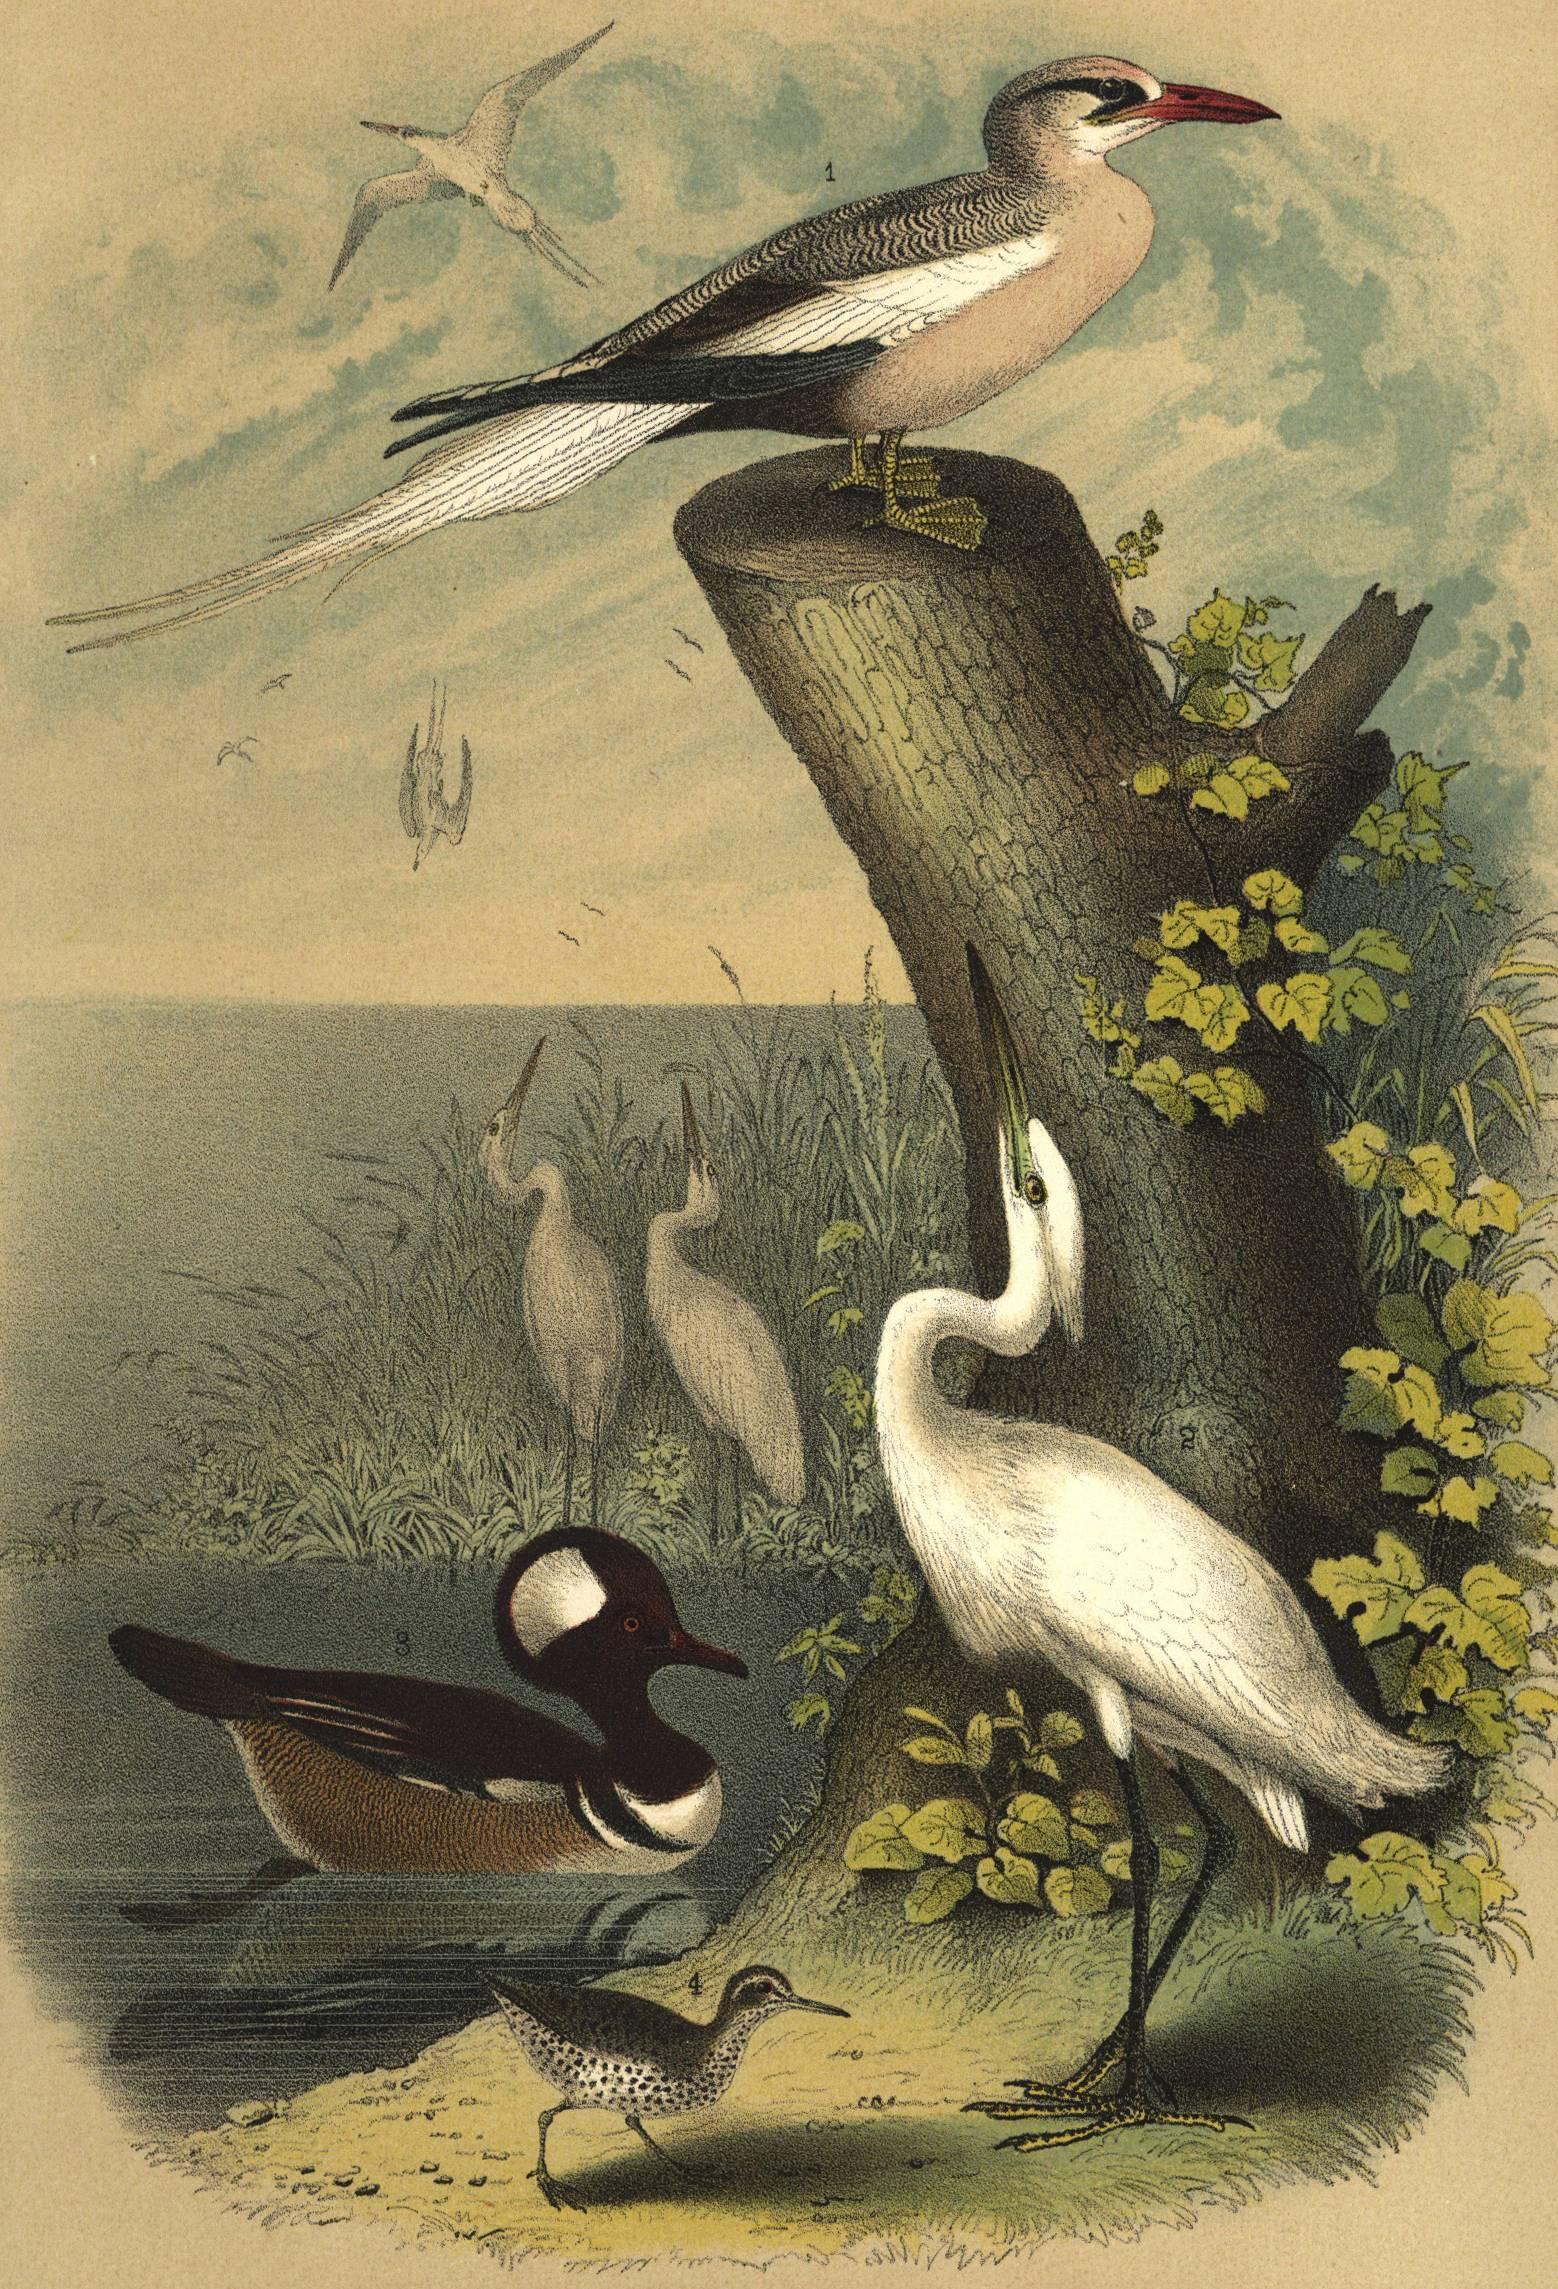 White Egret, Spotted Sandpiper, Field Sparrow... in Landscape Setting - Print by Jacob Henry Studer